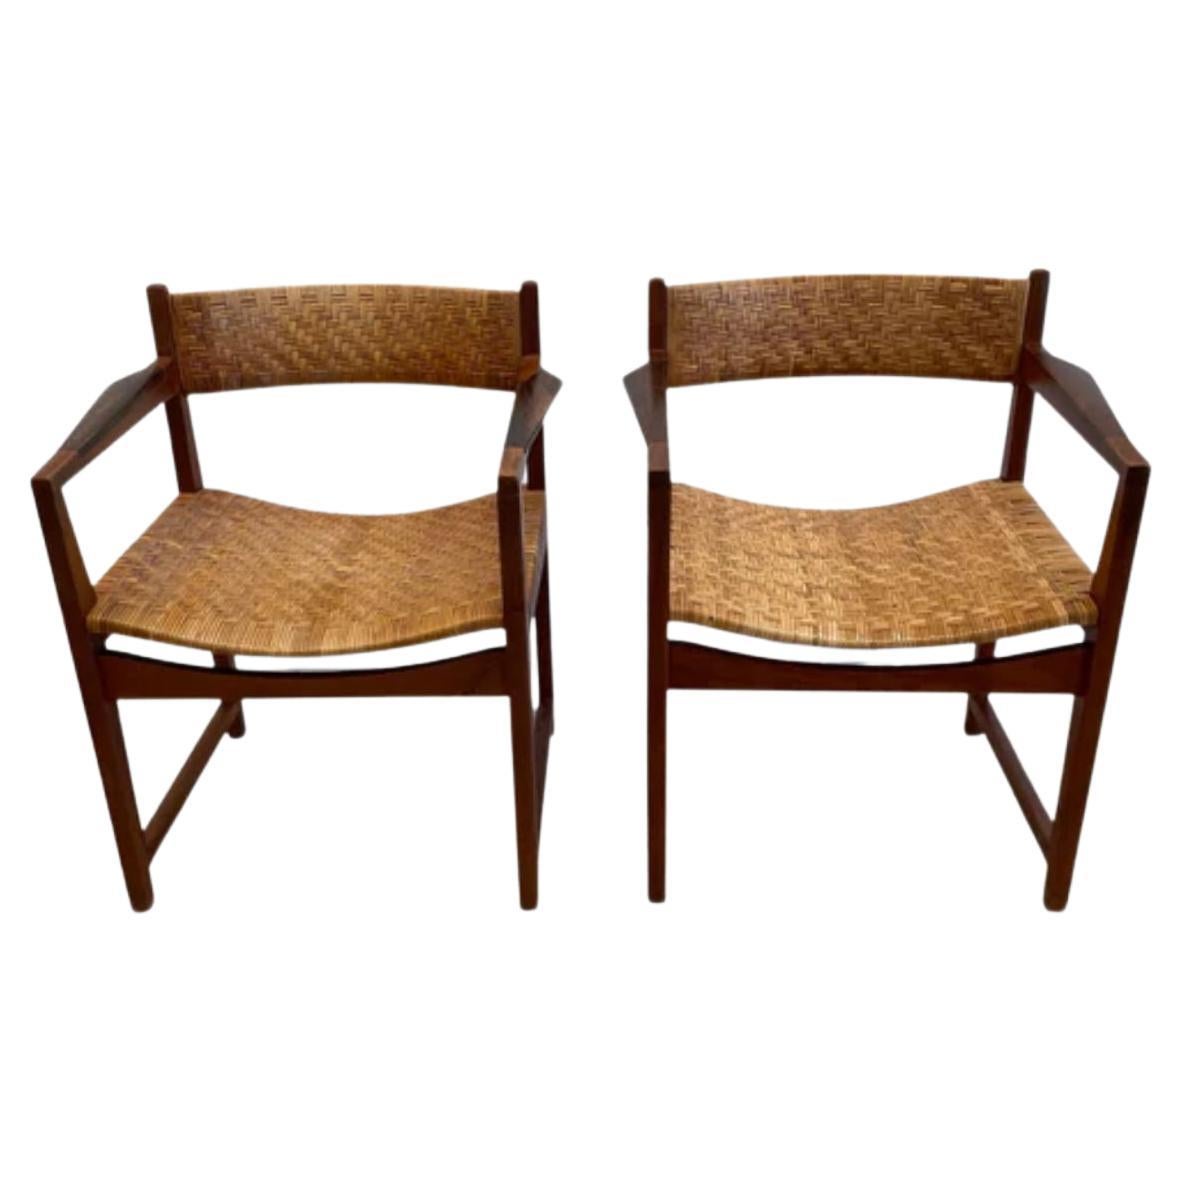 Rare Pair of Model 350 Armchairs by Peter Hvidt & Orla Mølgaard, 1950s